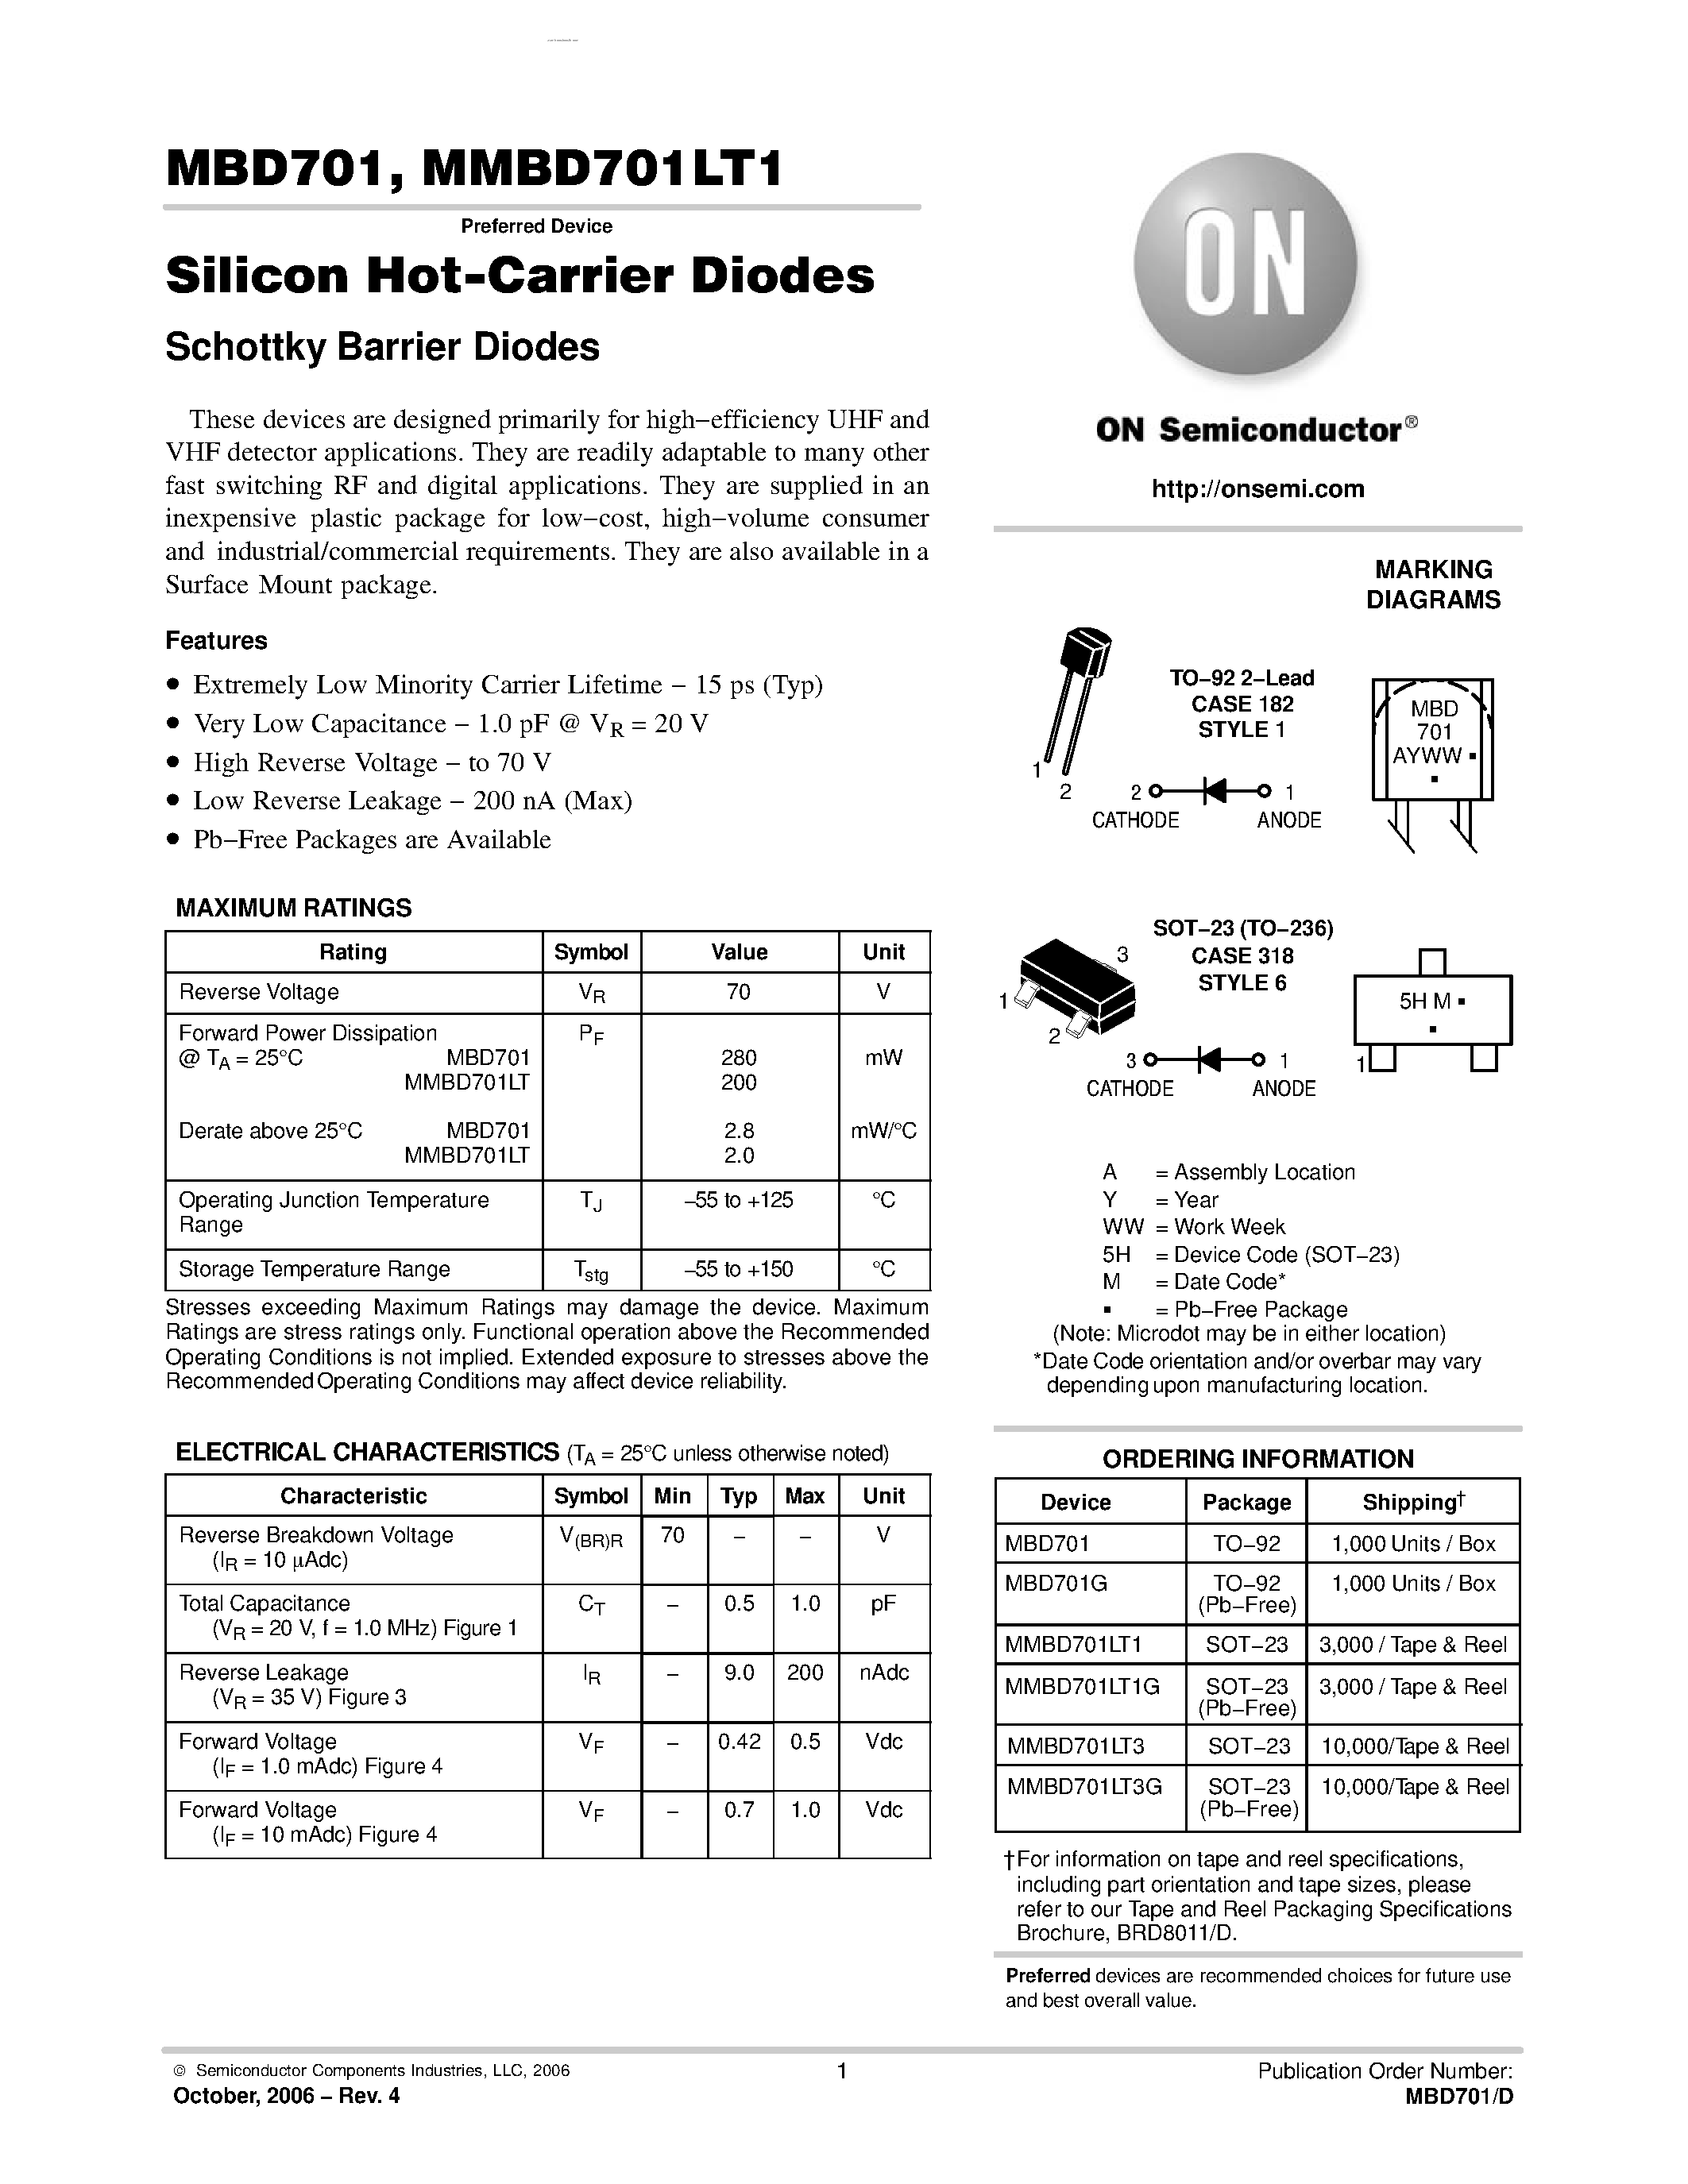 Datasheet MMBD701LT1 - SILICON HOT-CARRIER DETECTOR AND SWITCHING DIODES page 1